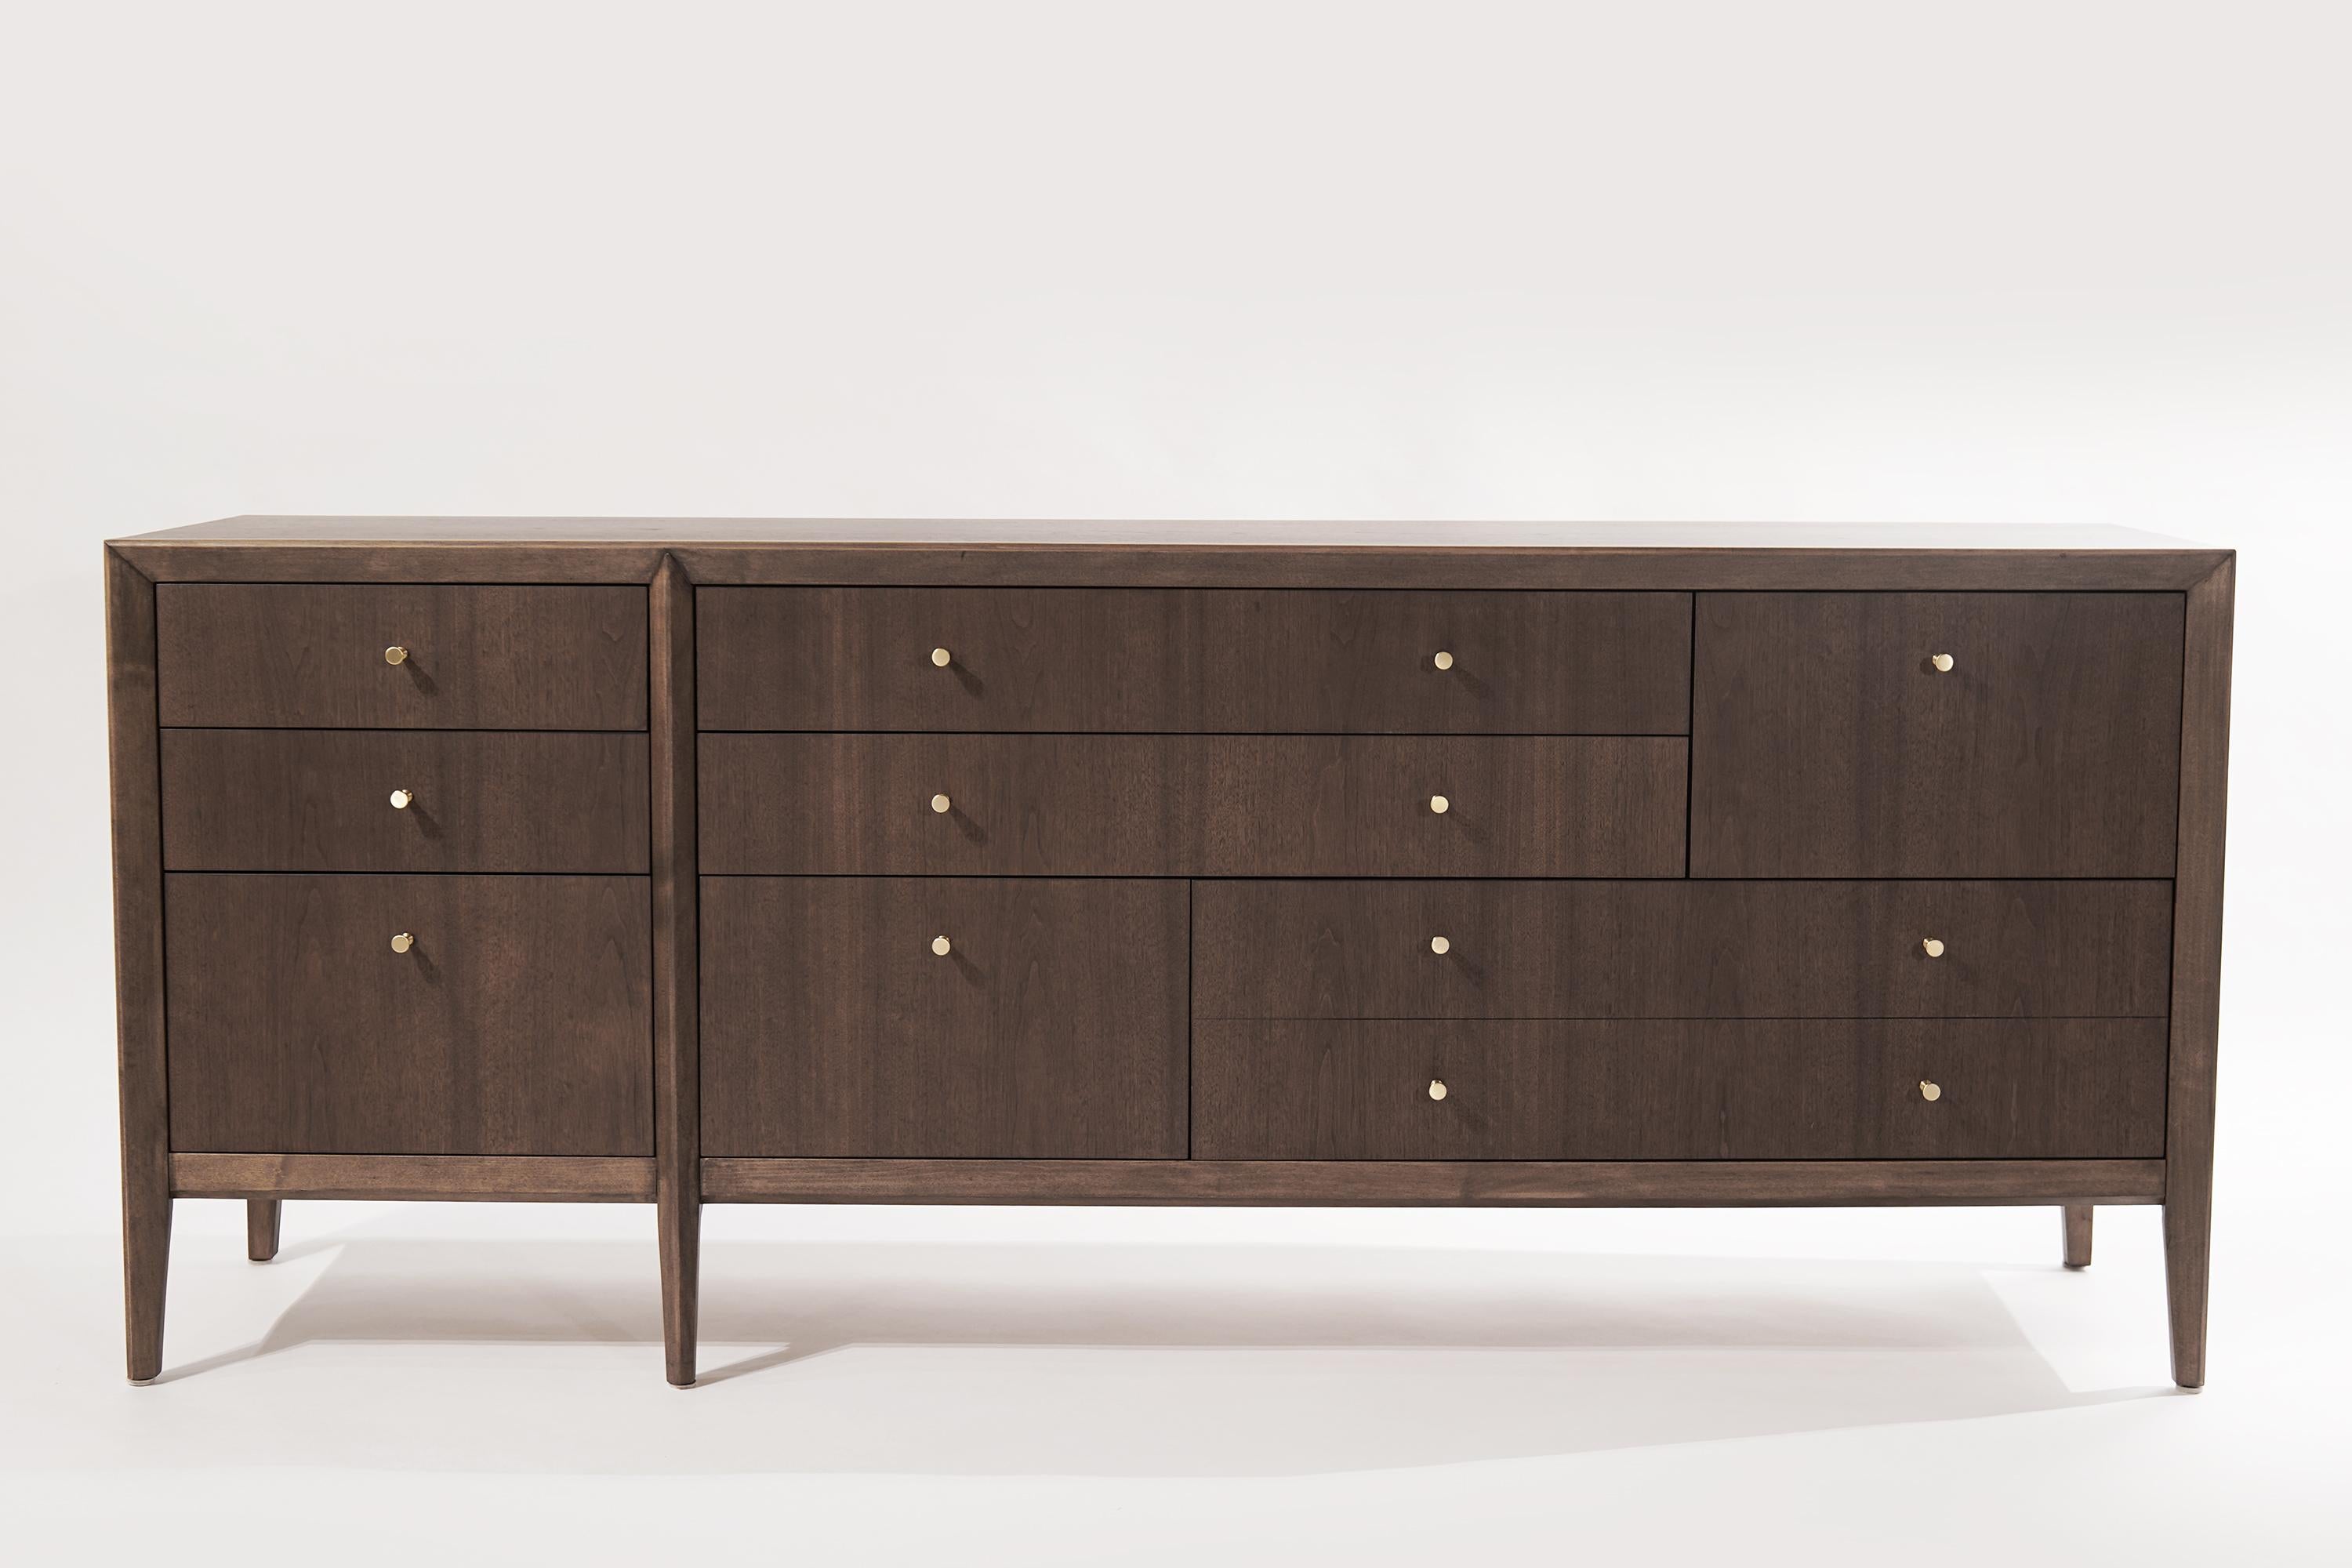 A walnut dresser or sideboard designed by Kipp Stewart, circa 1950-1959.

Featuring eight drawers in an asymmetrical design, providing ample storage space. Completely restored and refinished in an organic matte scratch/water-resistant